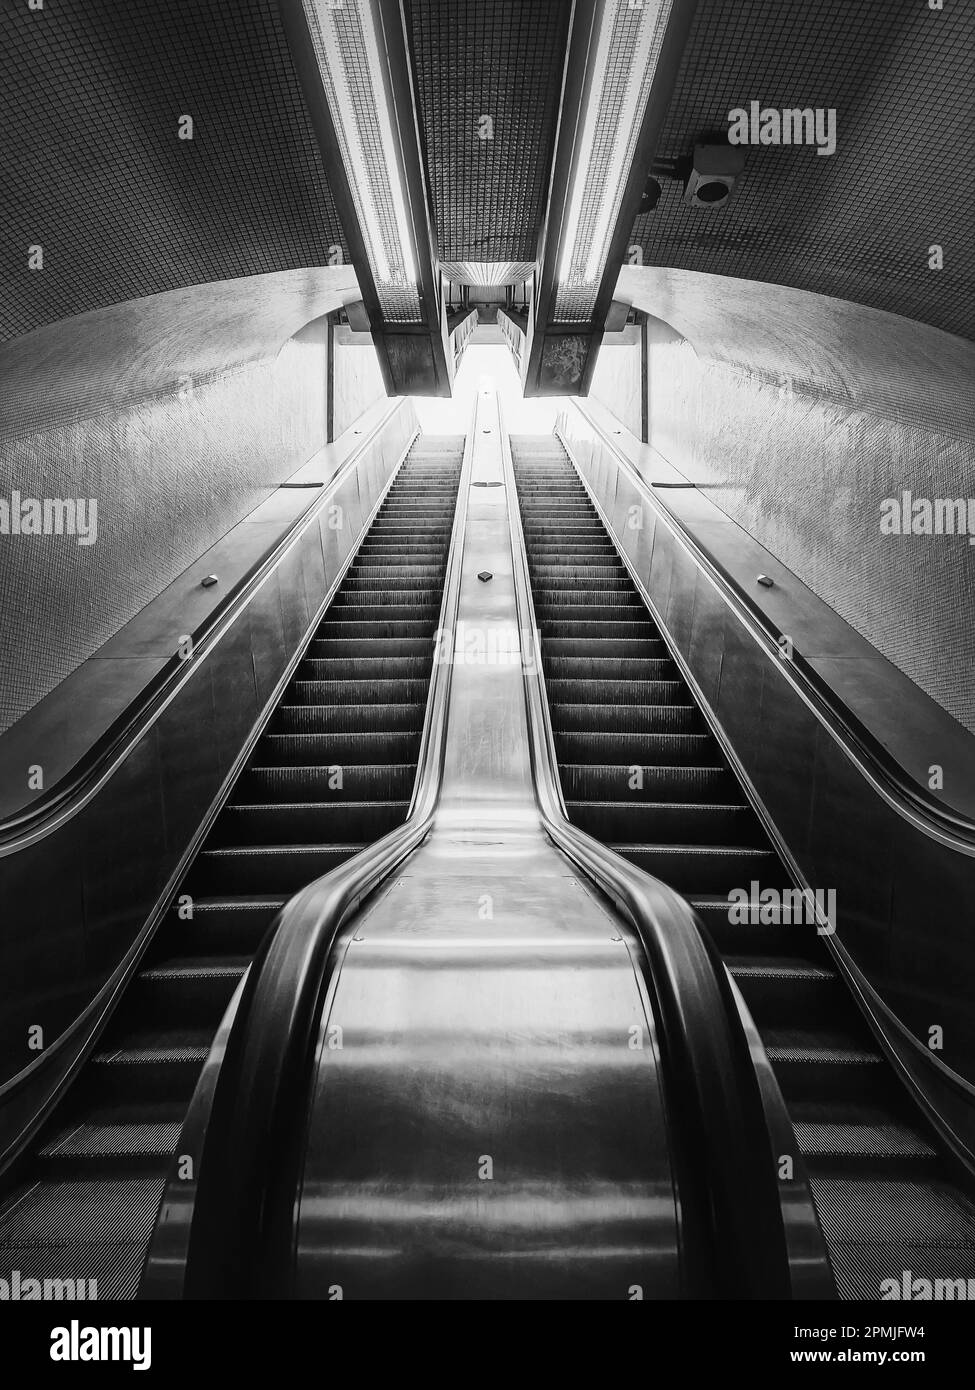 Subway escalator black and white architectural details. Symmetrical underground moving staircase Stock Photo